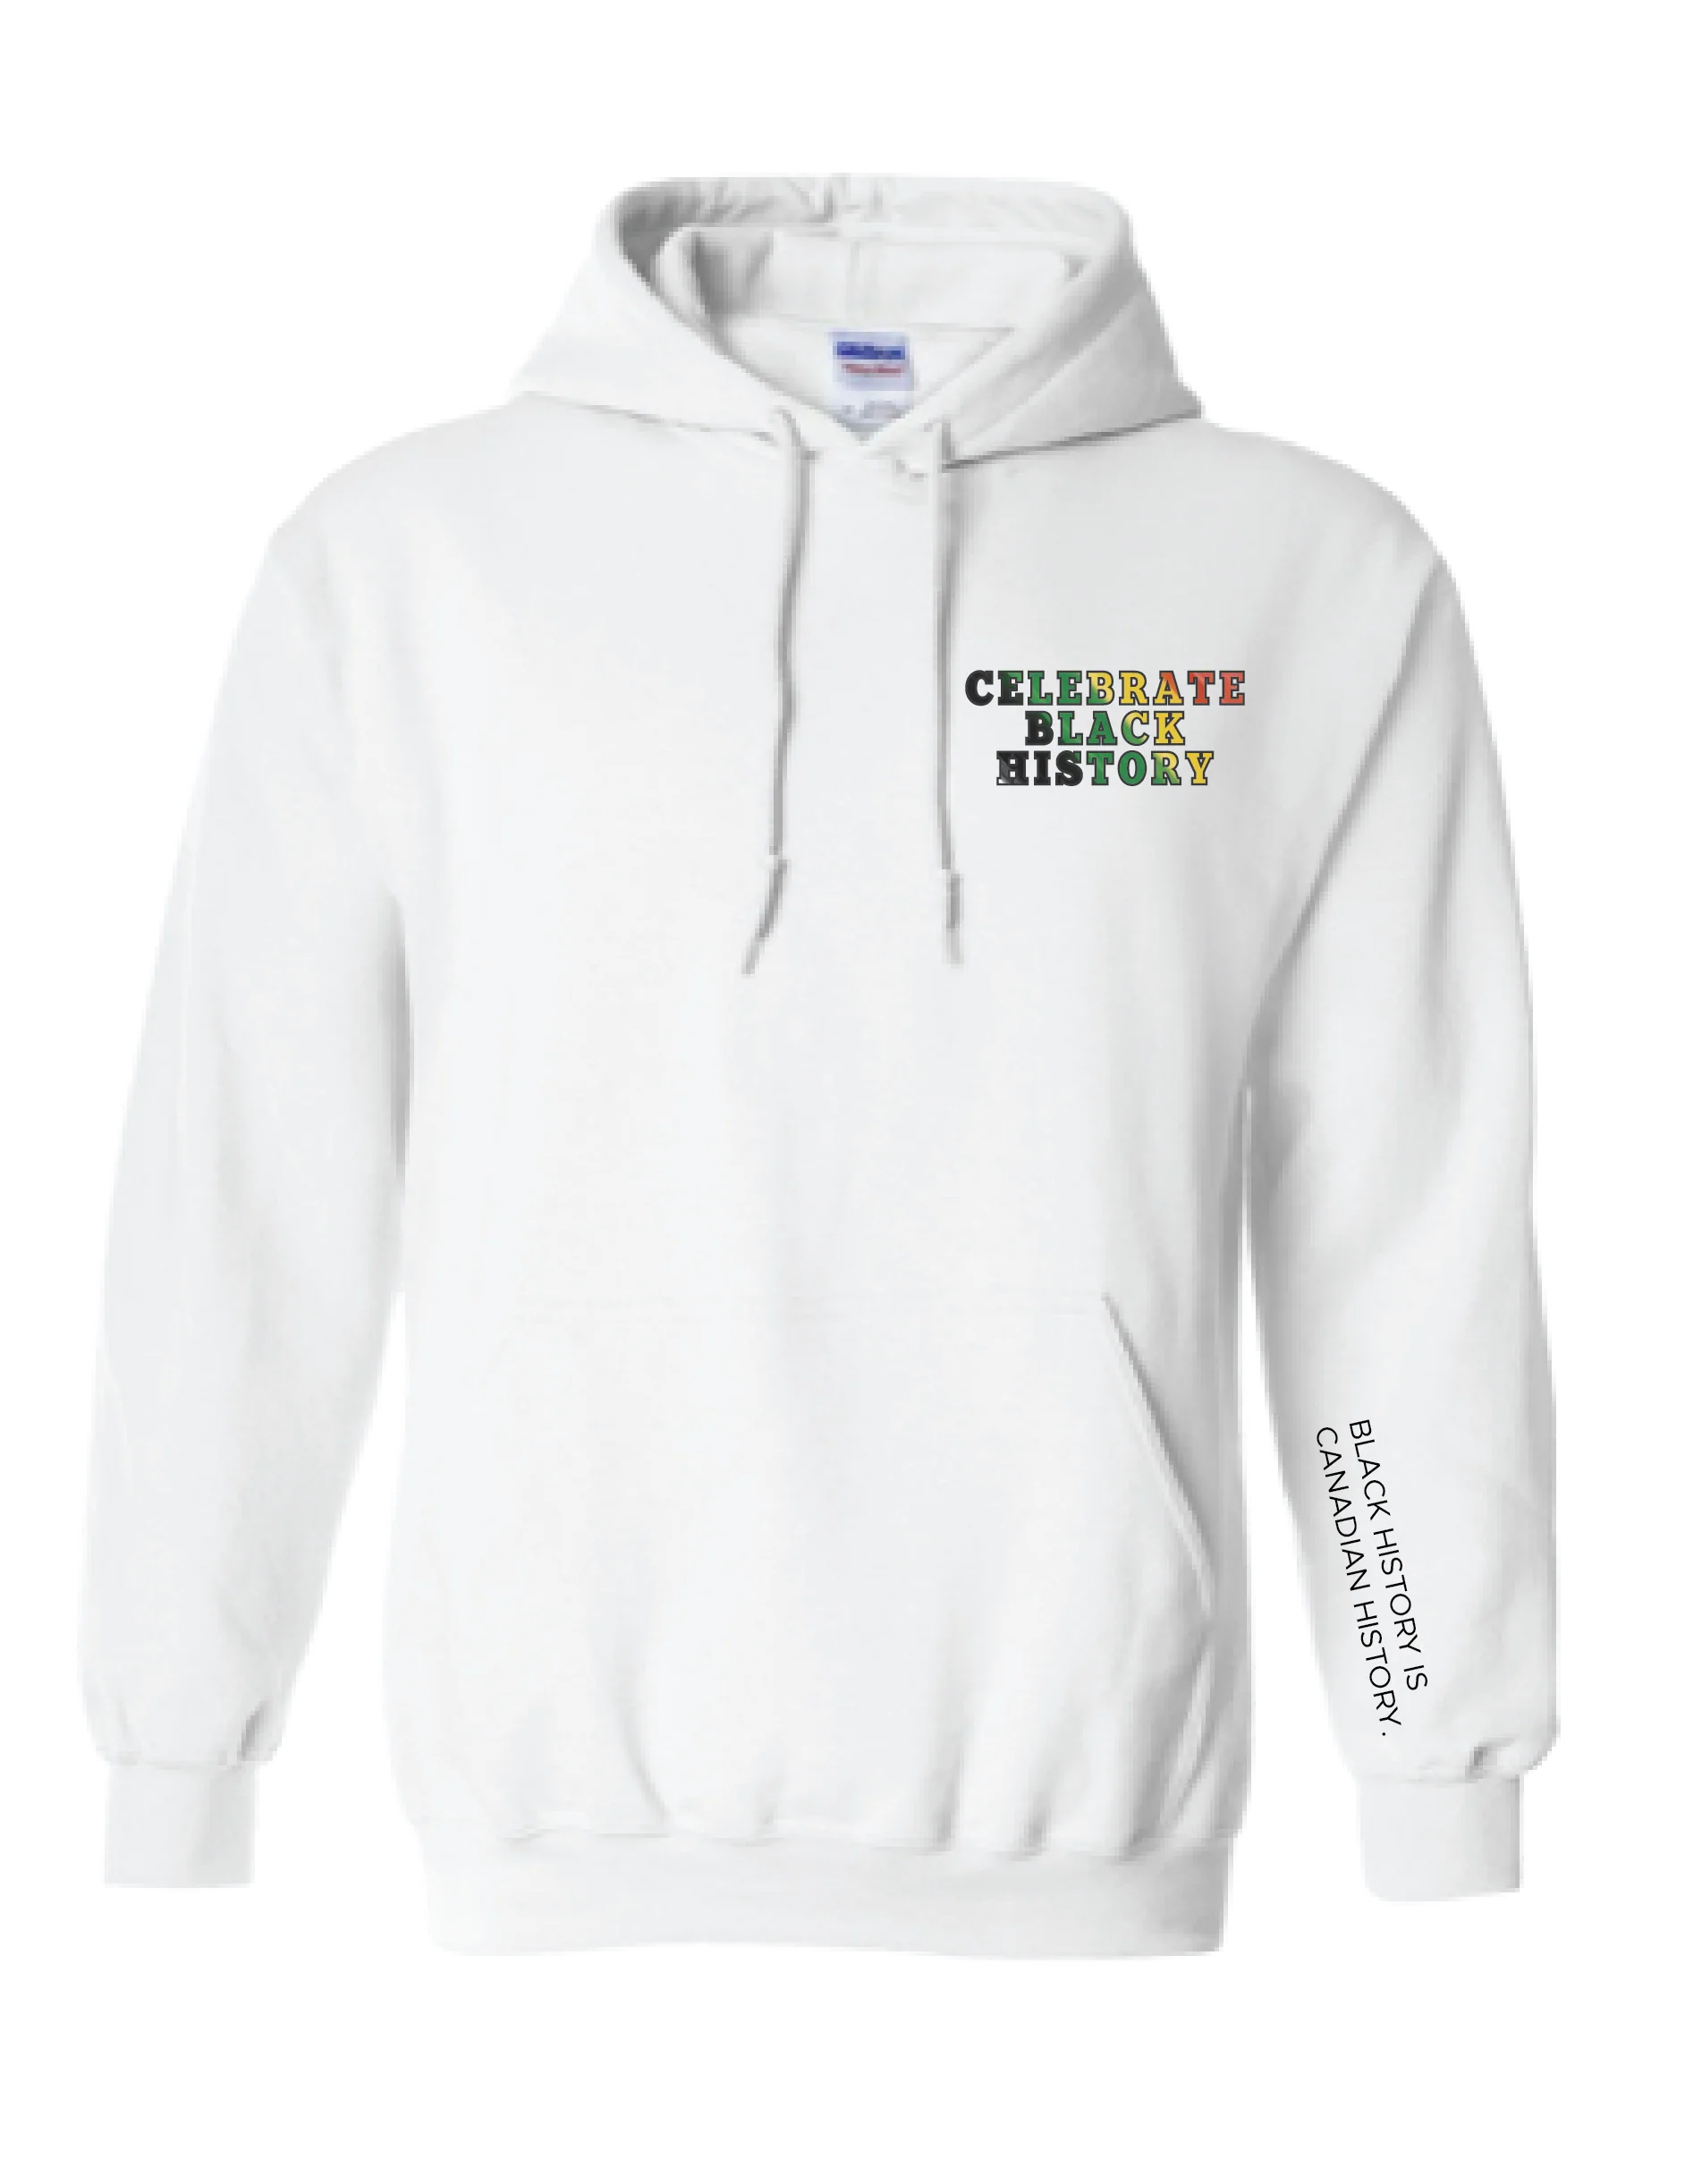 PAN AFRICAN COLOURS CELEBRATE BLACK HISTORY YOUTH HOODIE